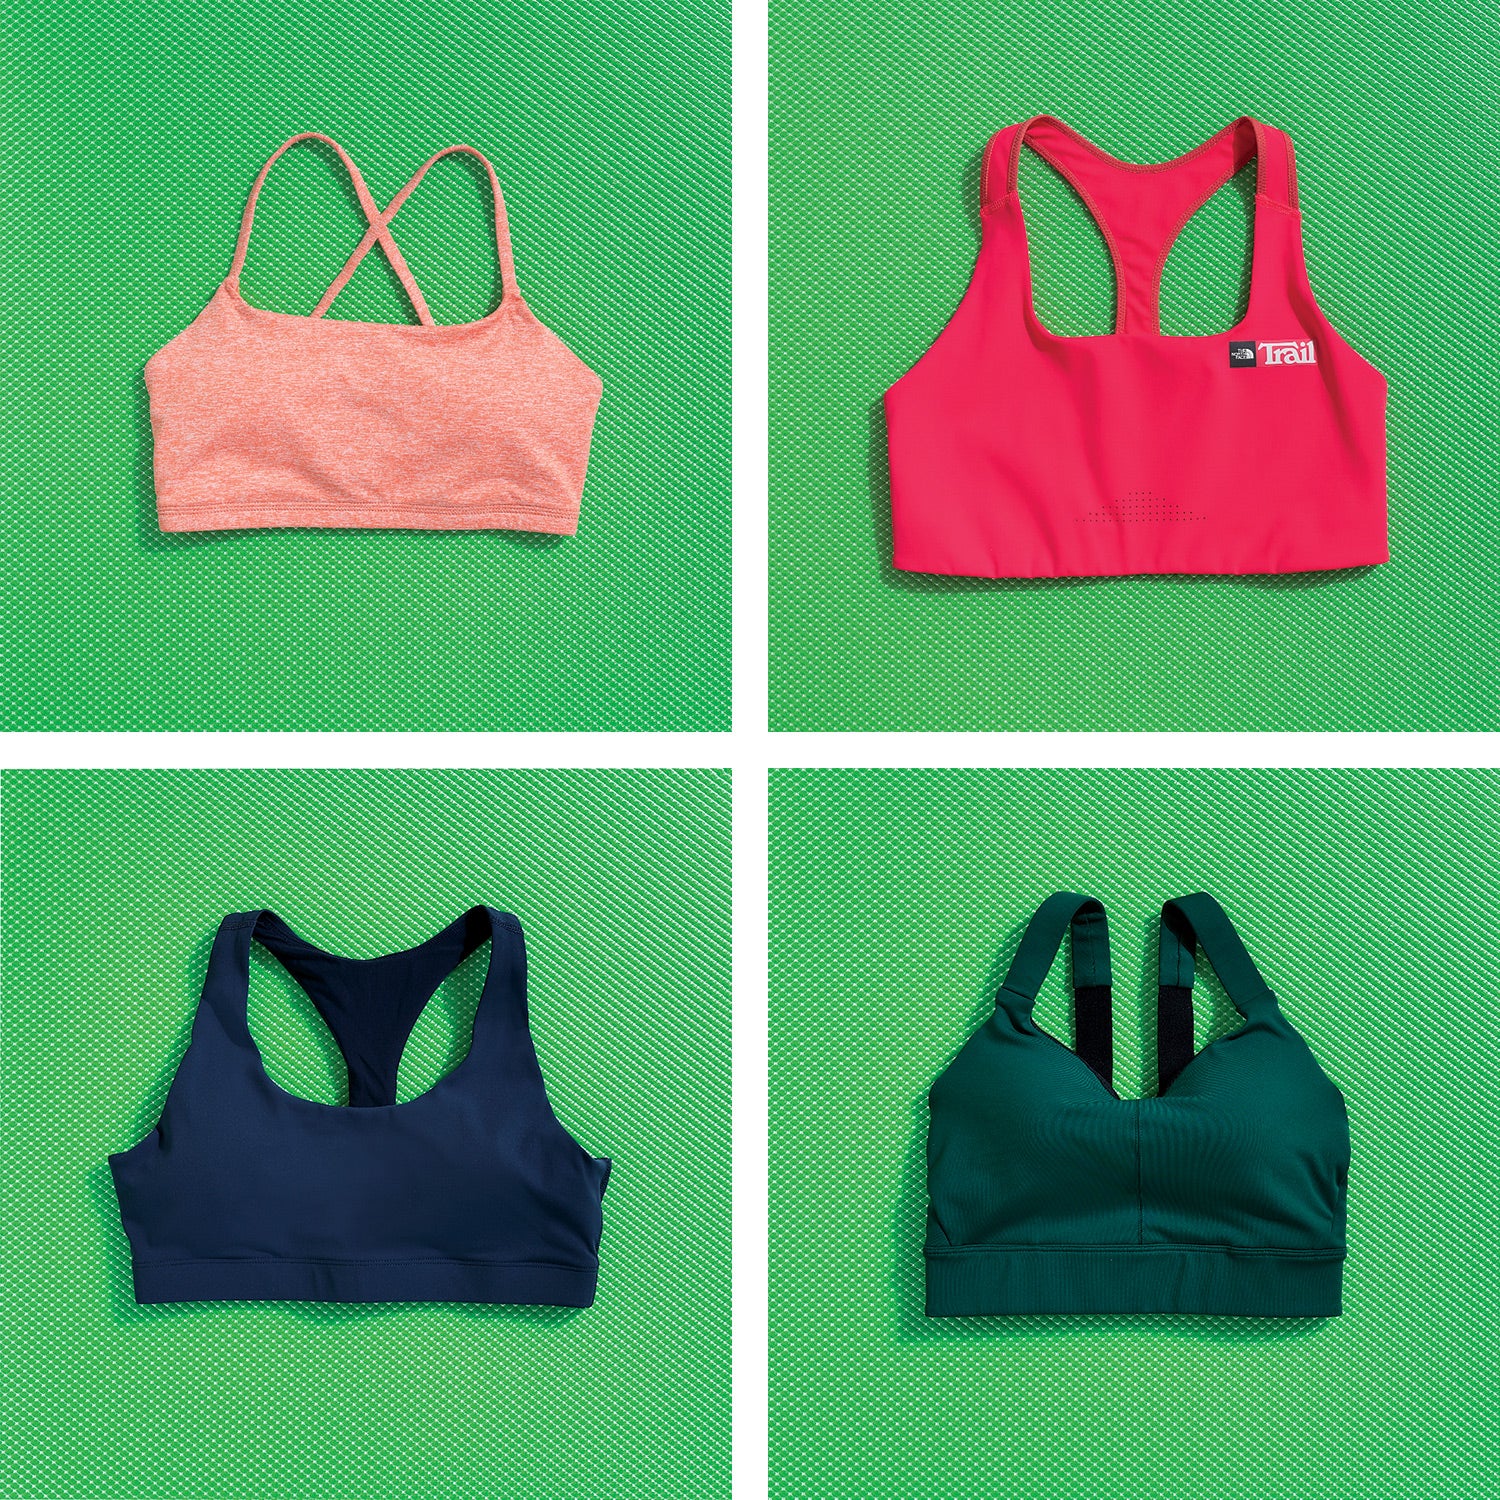 4 sport bras- new with tags. Never worn.